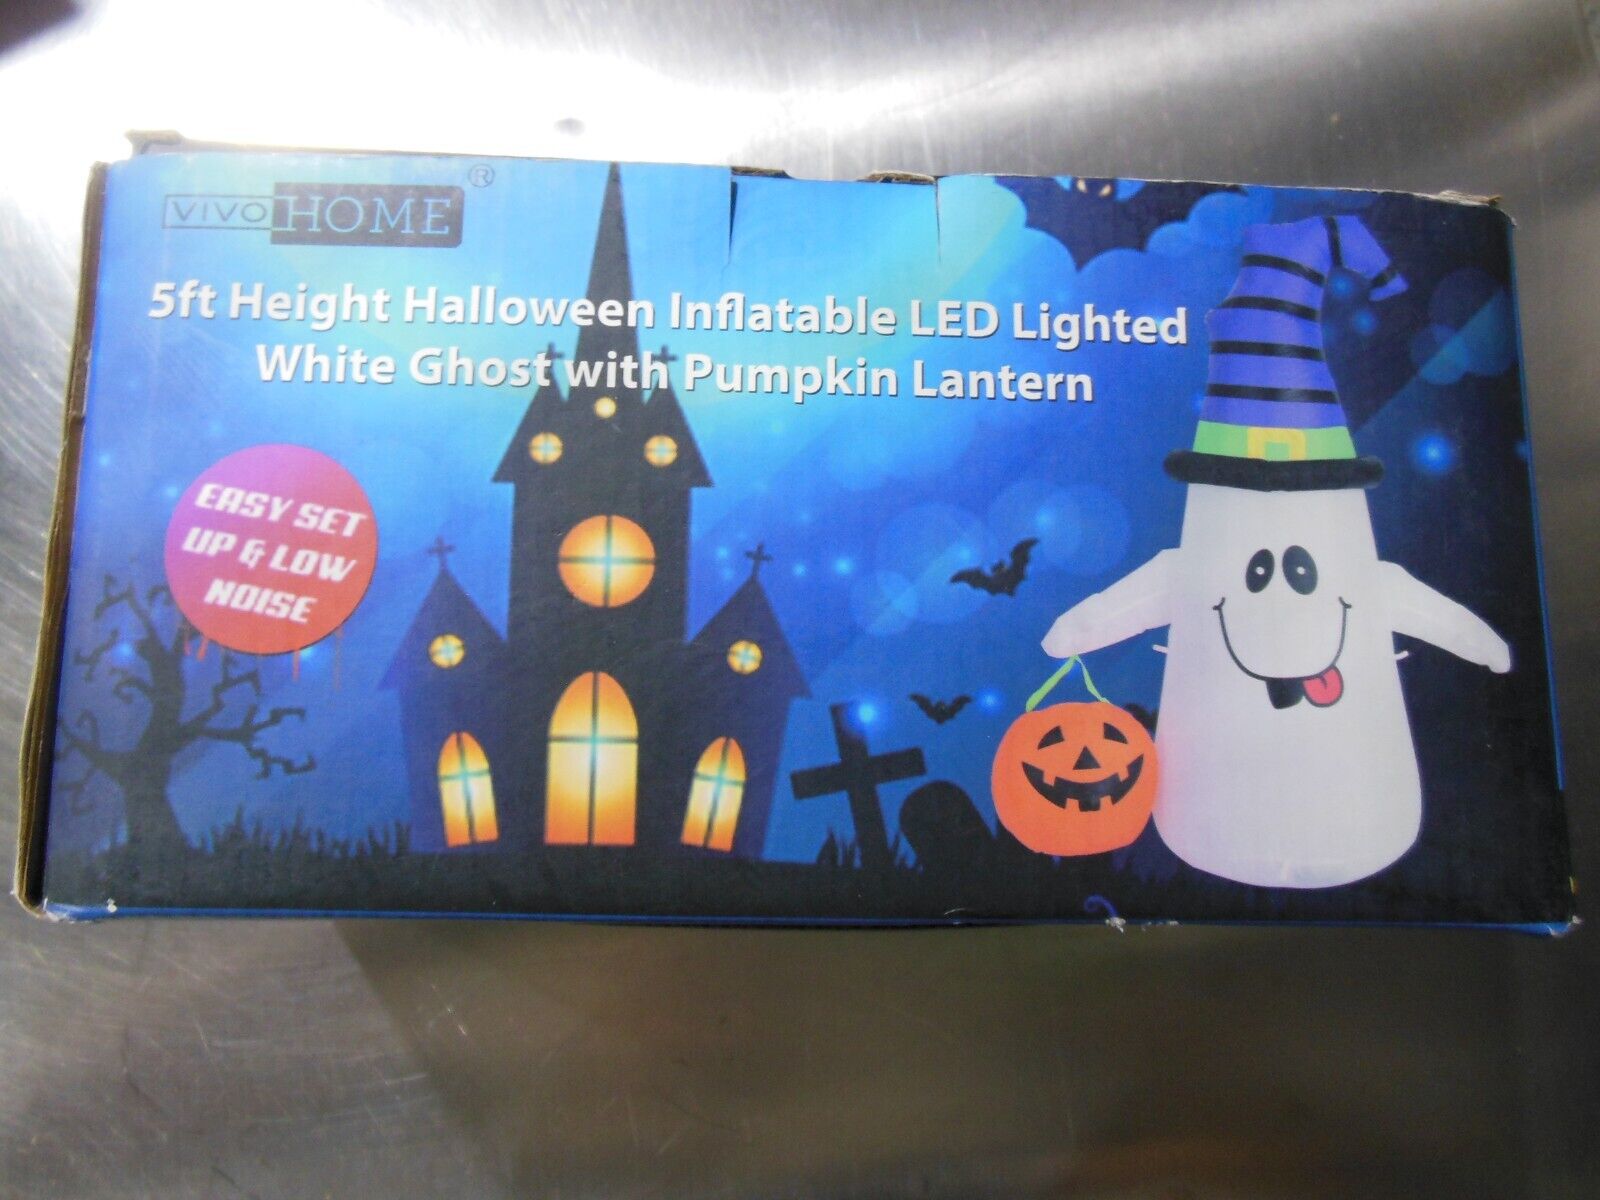 VIVOHOME 5 FT HALLOWEEN INFLATABLE LED LIGHTED WHITE GHOST WITH PUMPKIN LANTERN